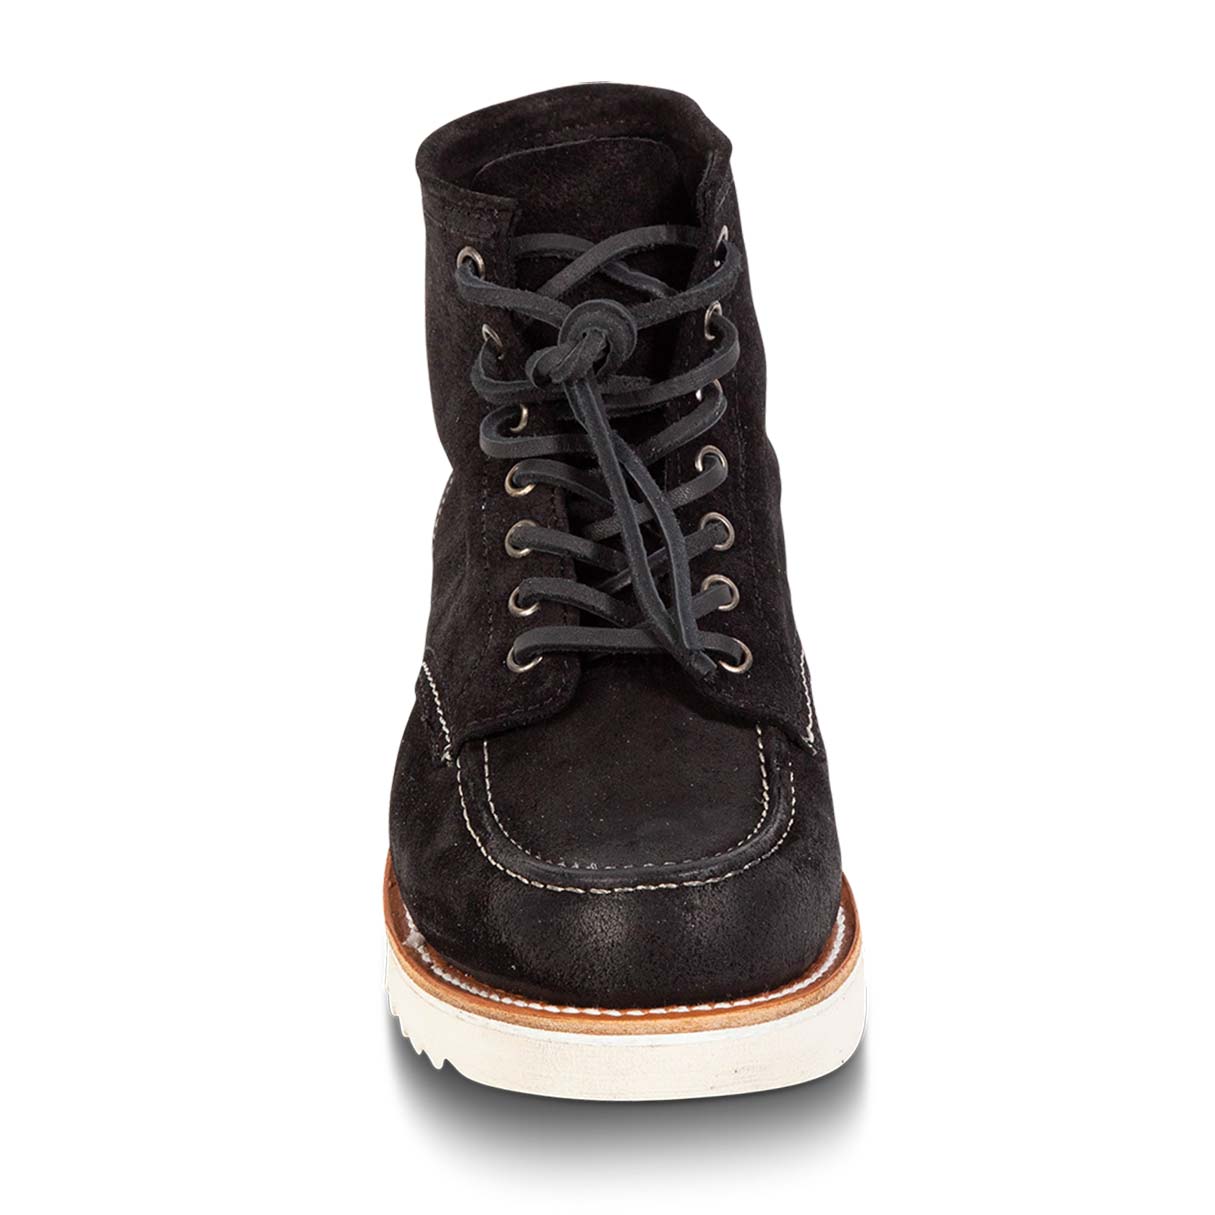 Front view showing suede tongue construction and adjustable leather lace closure on FREEBIRD men's Carbon black suede shoe